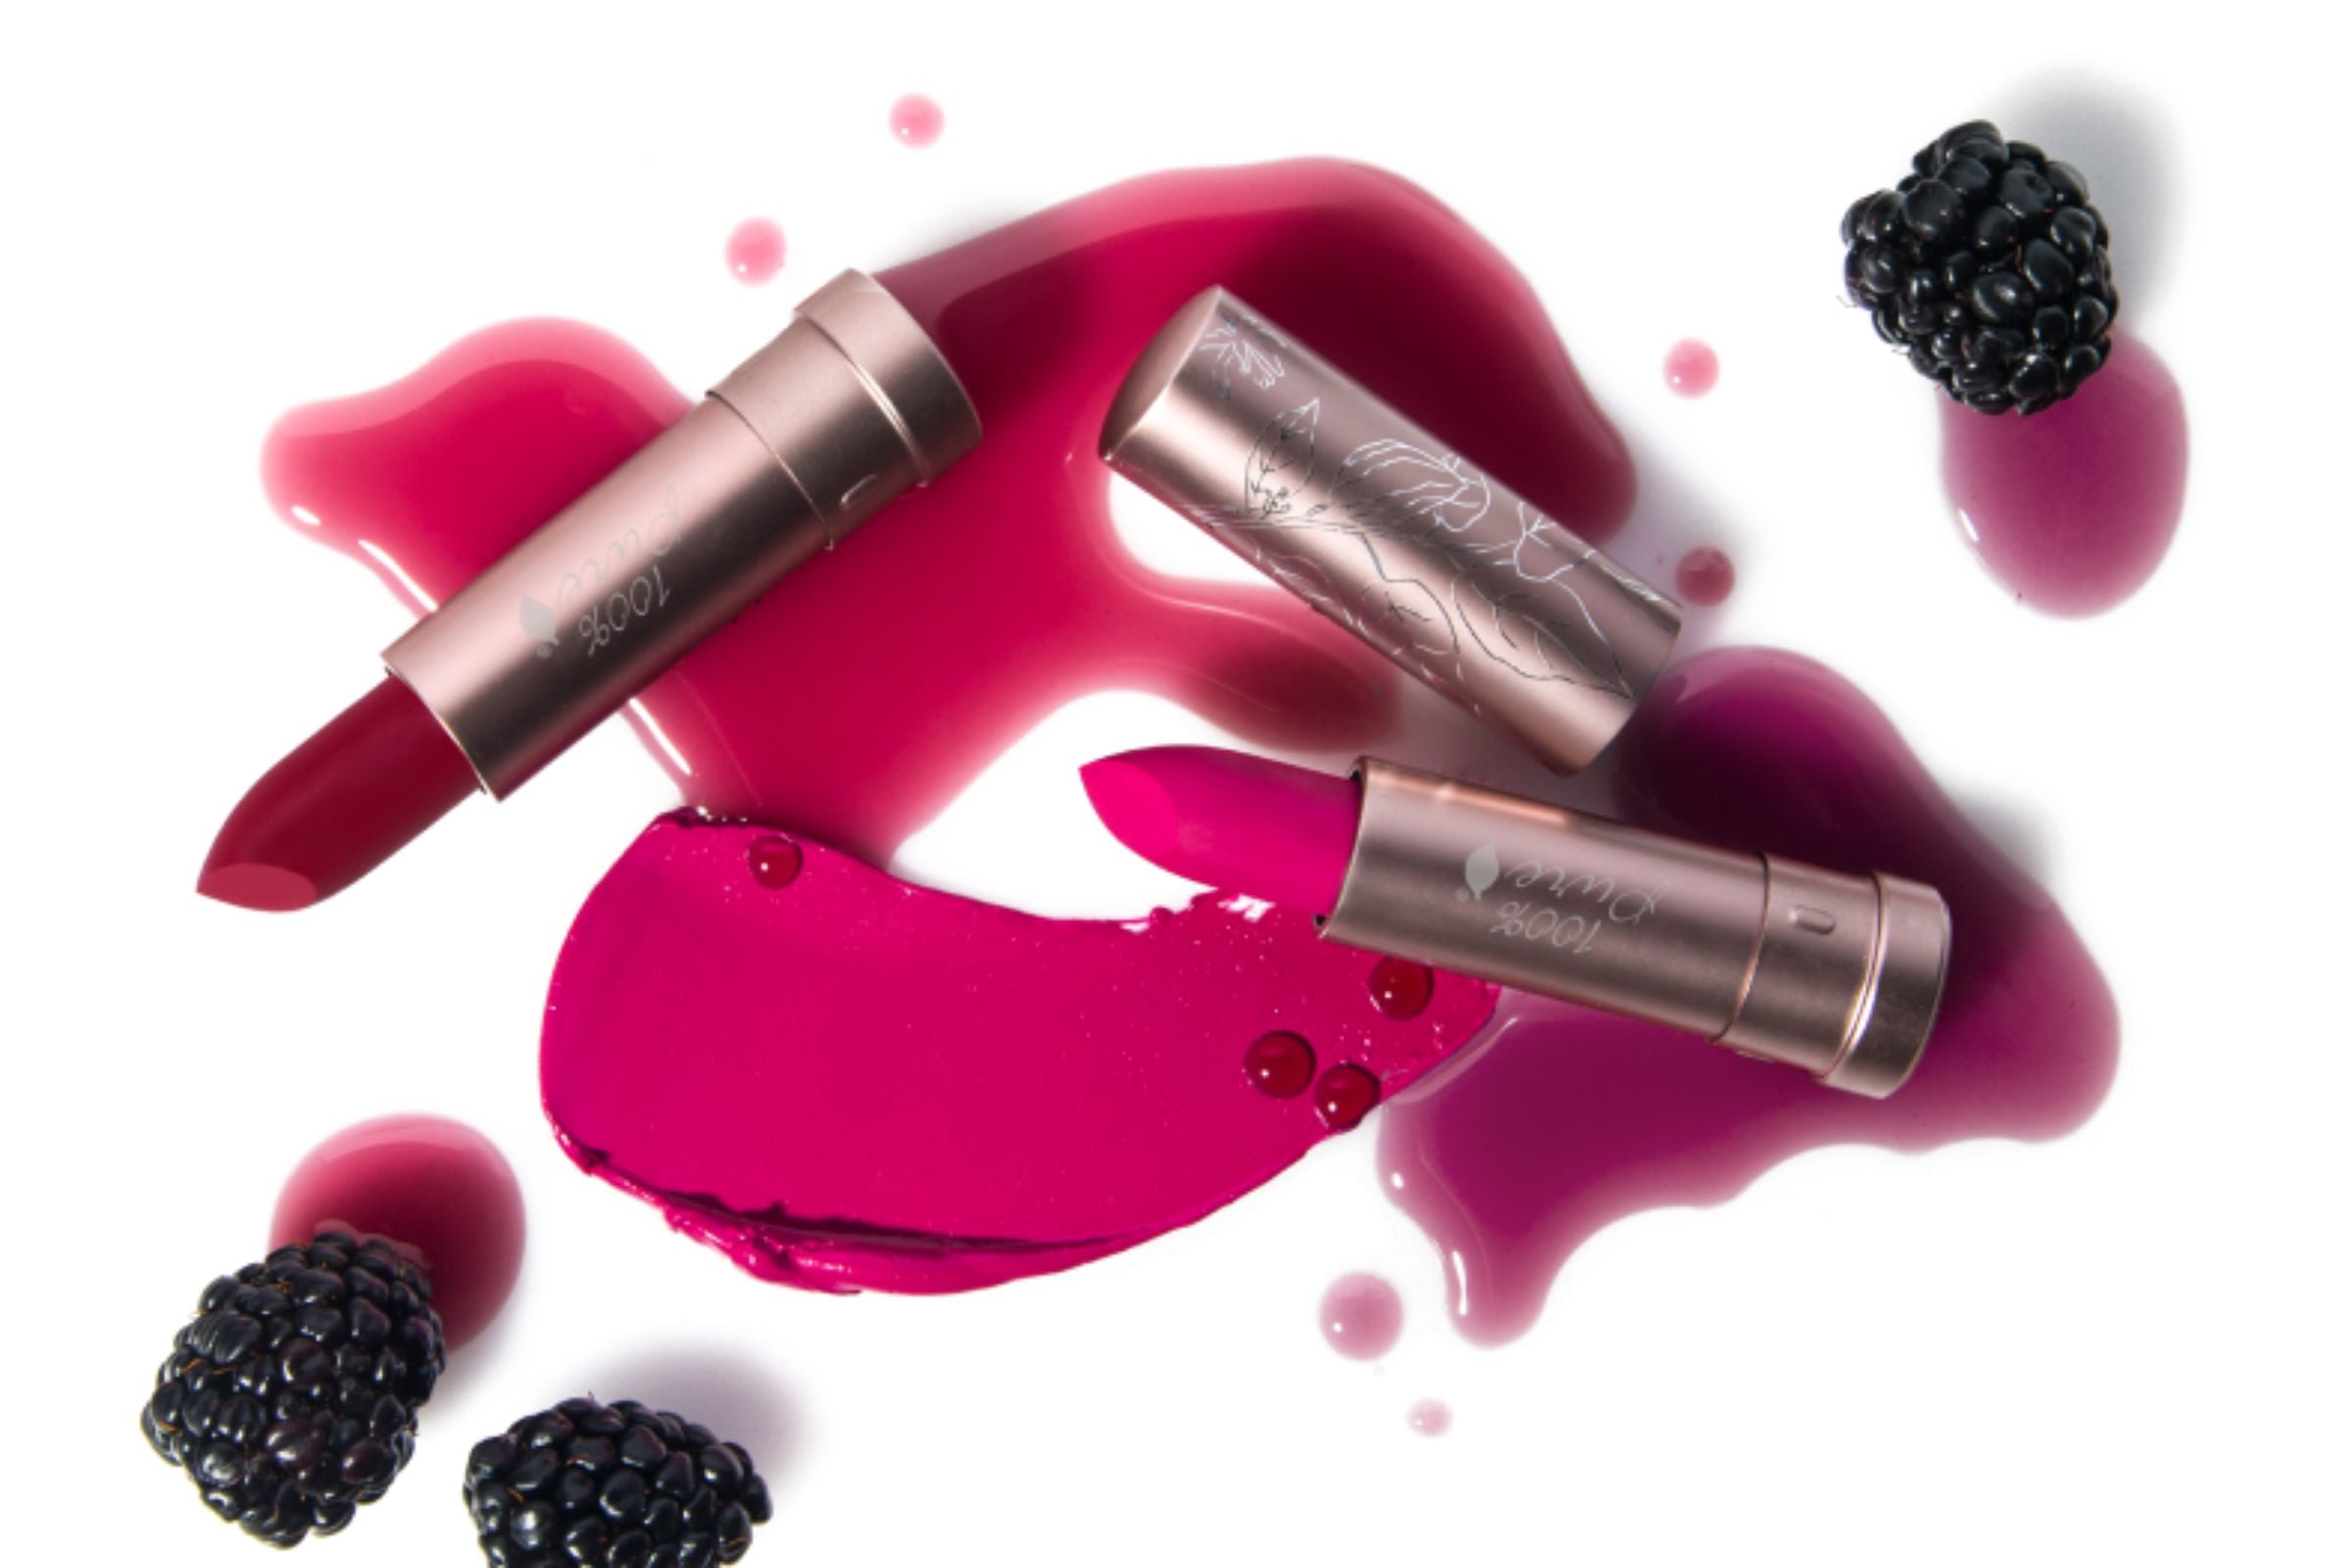 Cover_Photo_-_100_Pure_5_Reasons_Why_100_PURE_s_Fruit_Pigmented_Cocoa_Butter_Matte_Lipstick_Belongs_in_Your_Makeup_Kit